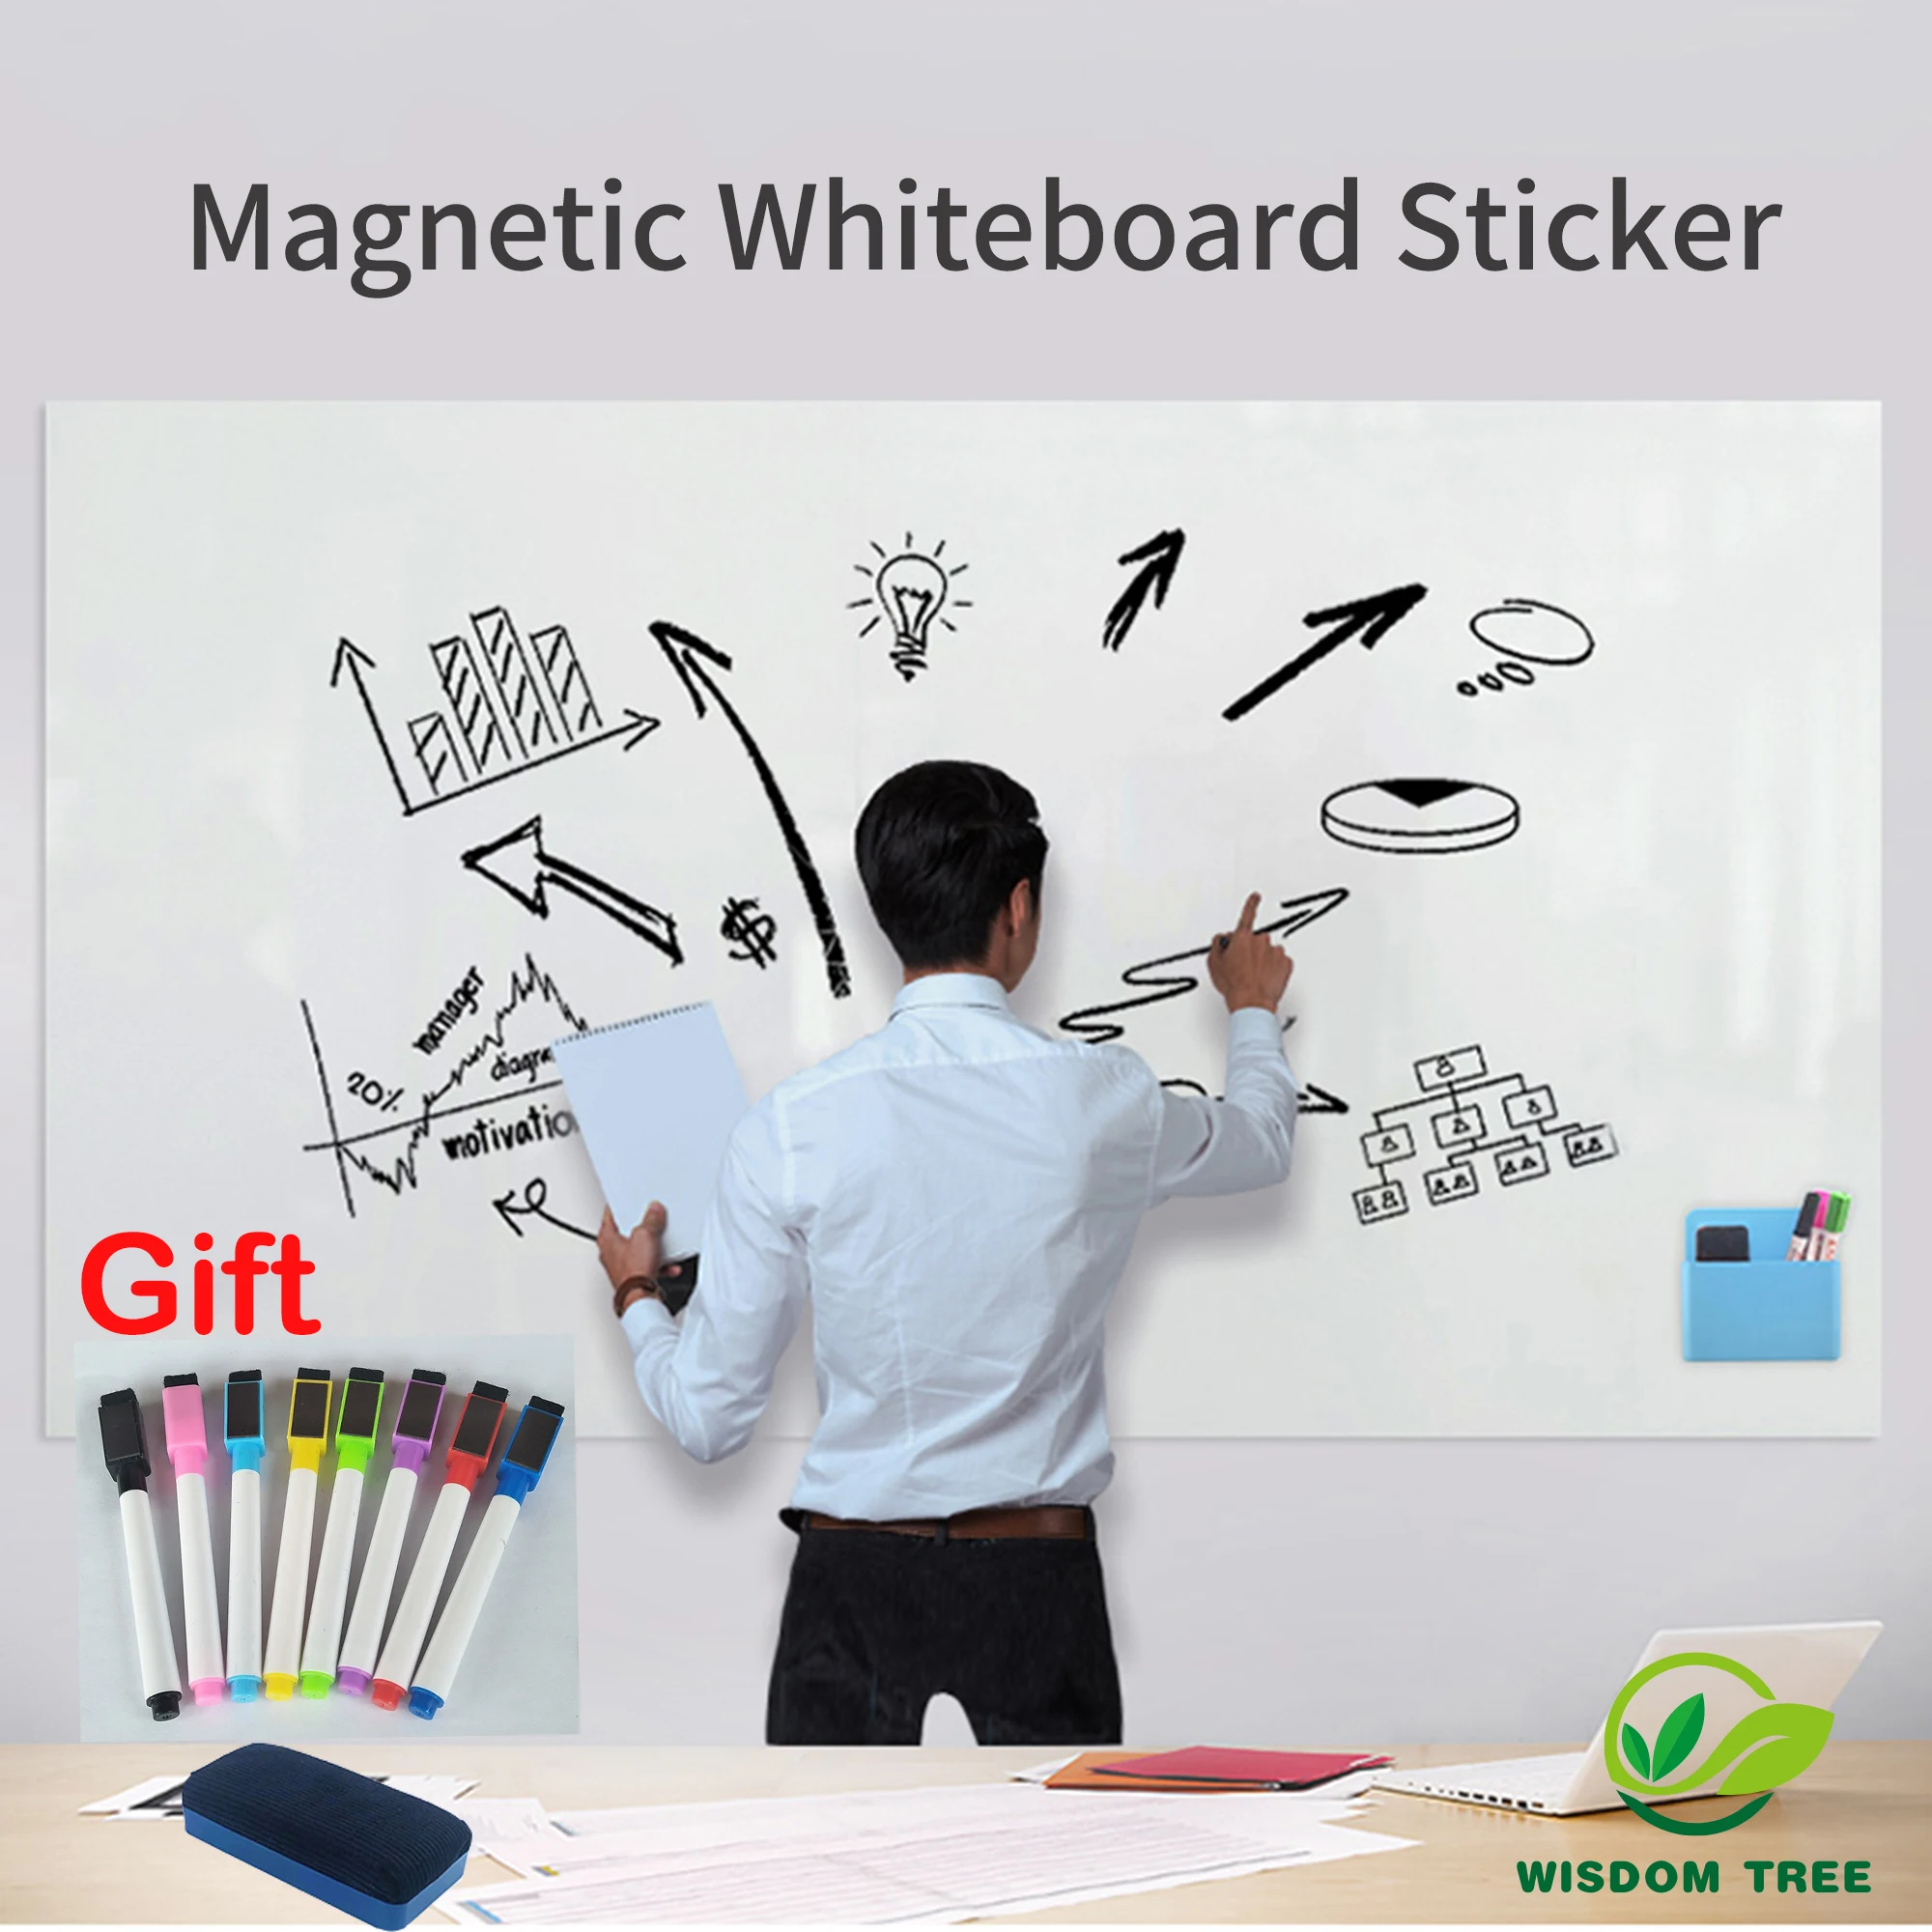 Whiteboard Soft Magnetic Wall Sticker Erasable Memo Message Drawing Board for Home Office School Teaching Bulletin Board